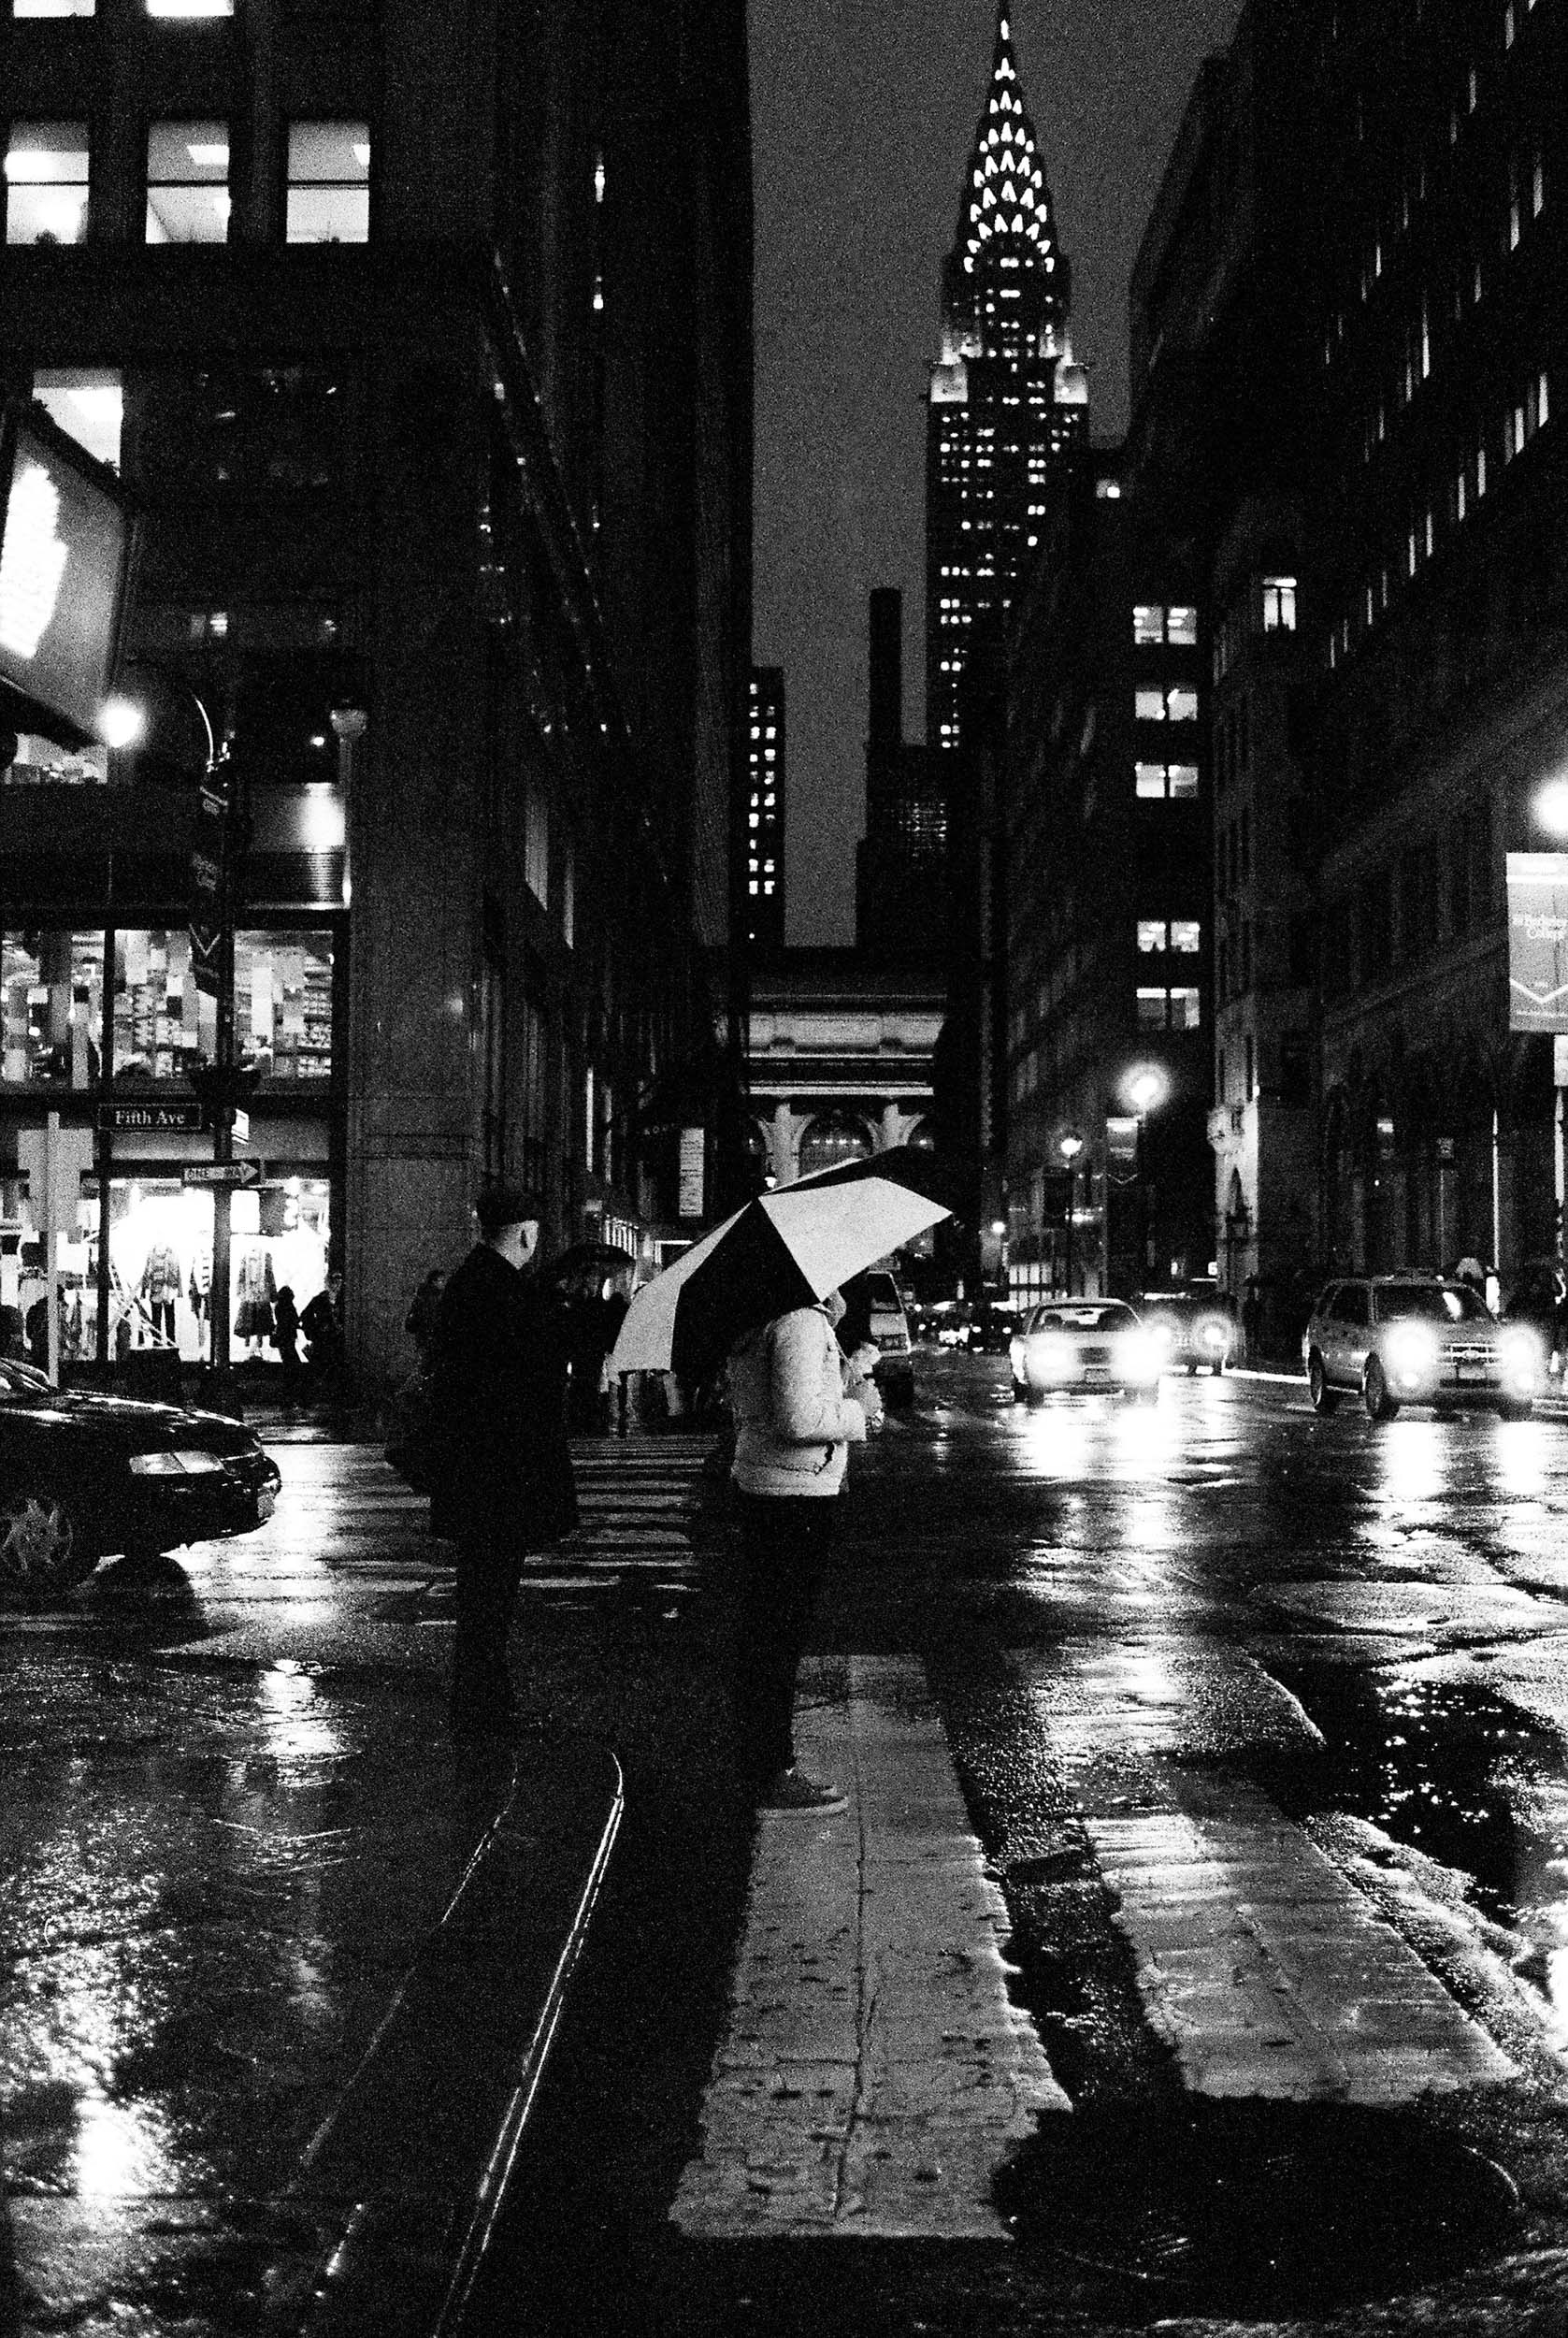 A RAINY GRITTY BLACK AND WHITE FILM PHOTO OF A CROSSWALK IN MIDTOWN MANHATTAN 